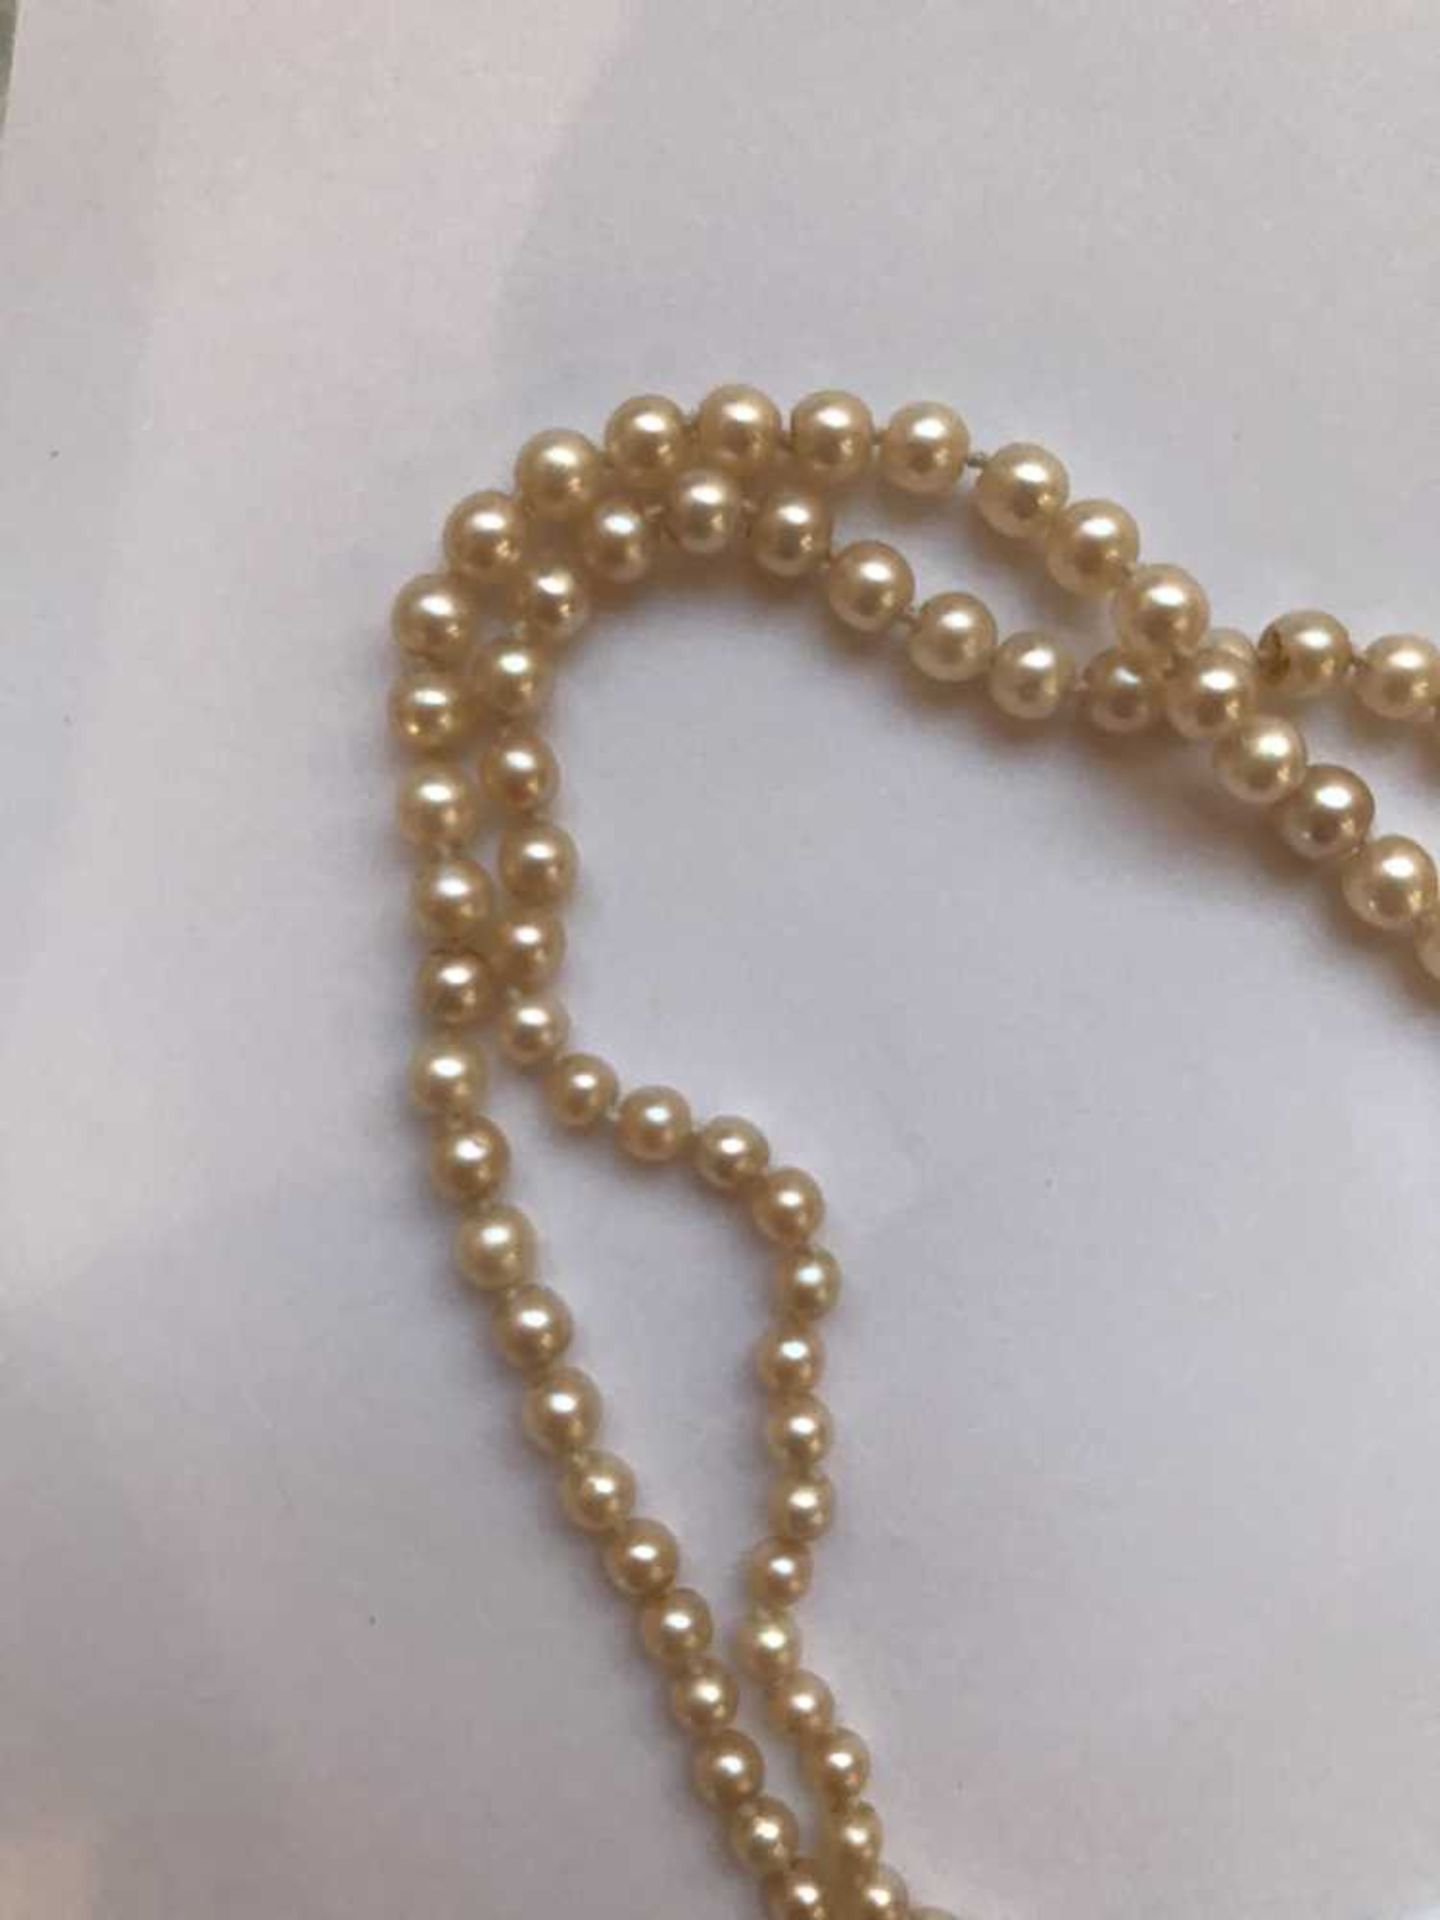 A natural saltwater pearl necklace - Image 4 of 6